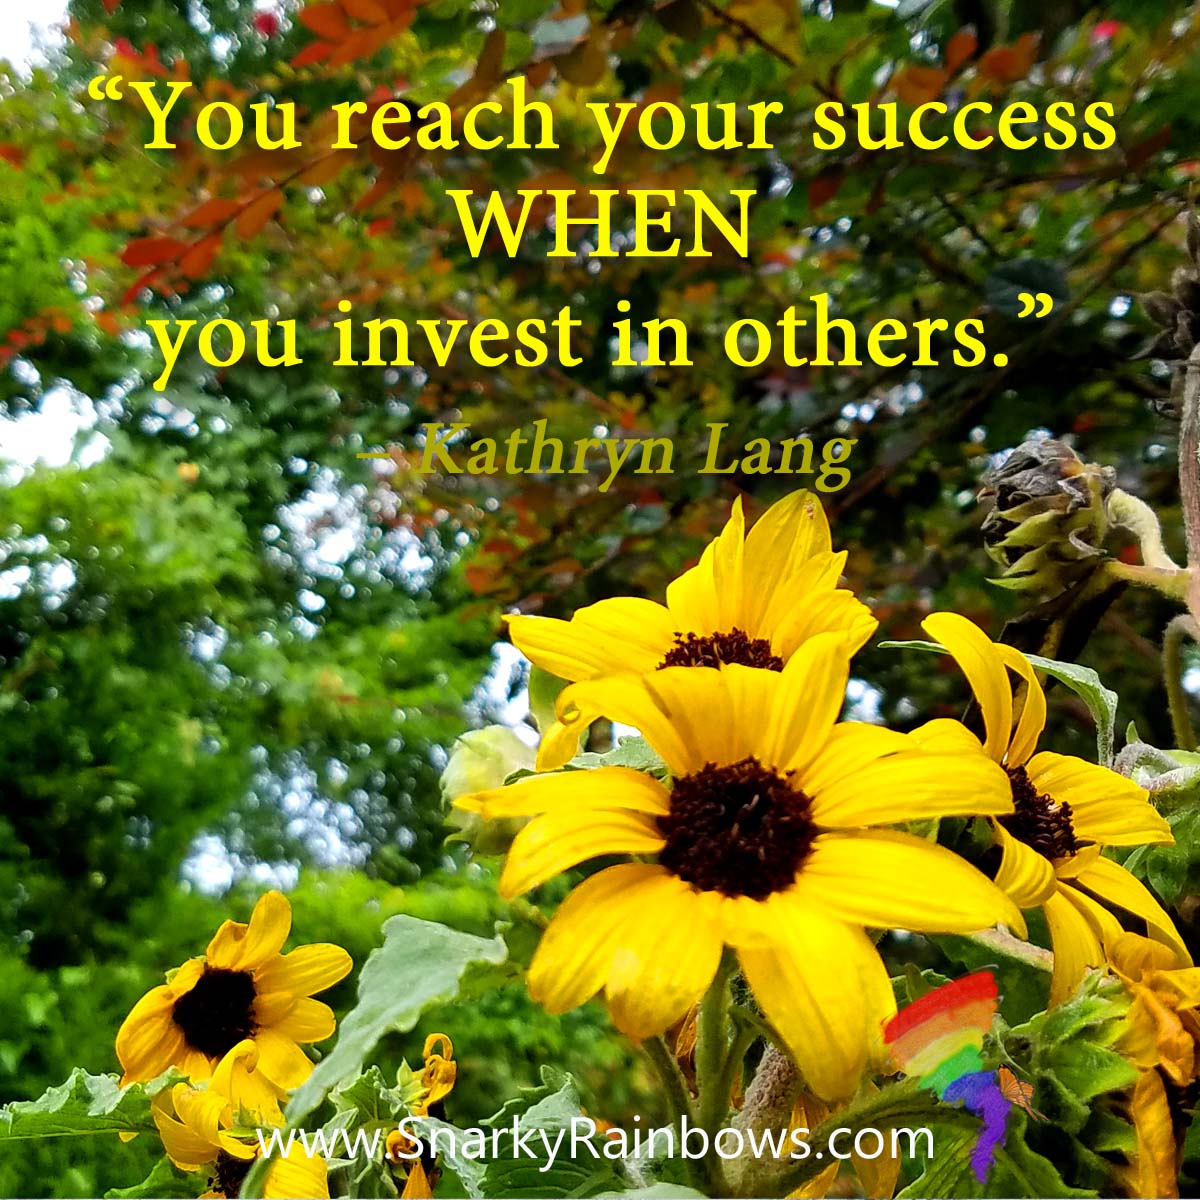 #QuoteoftheDay - invest in others